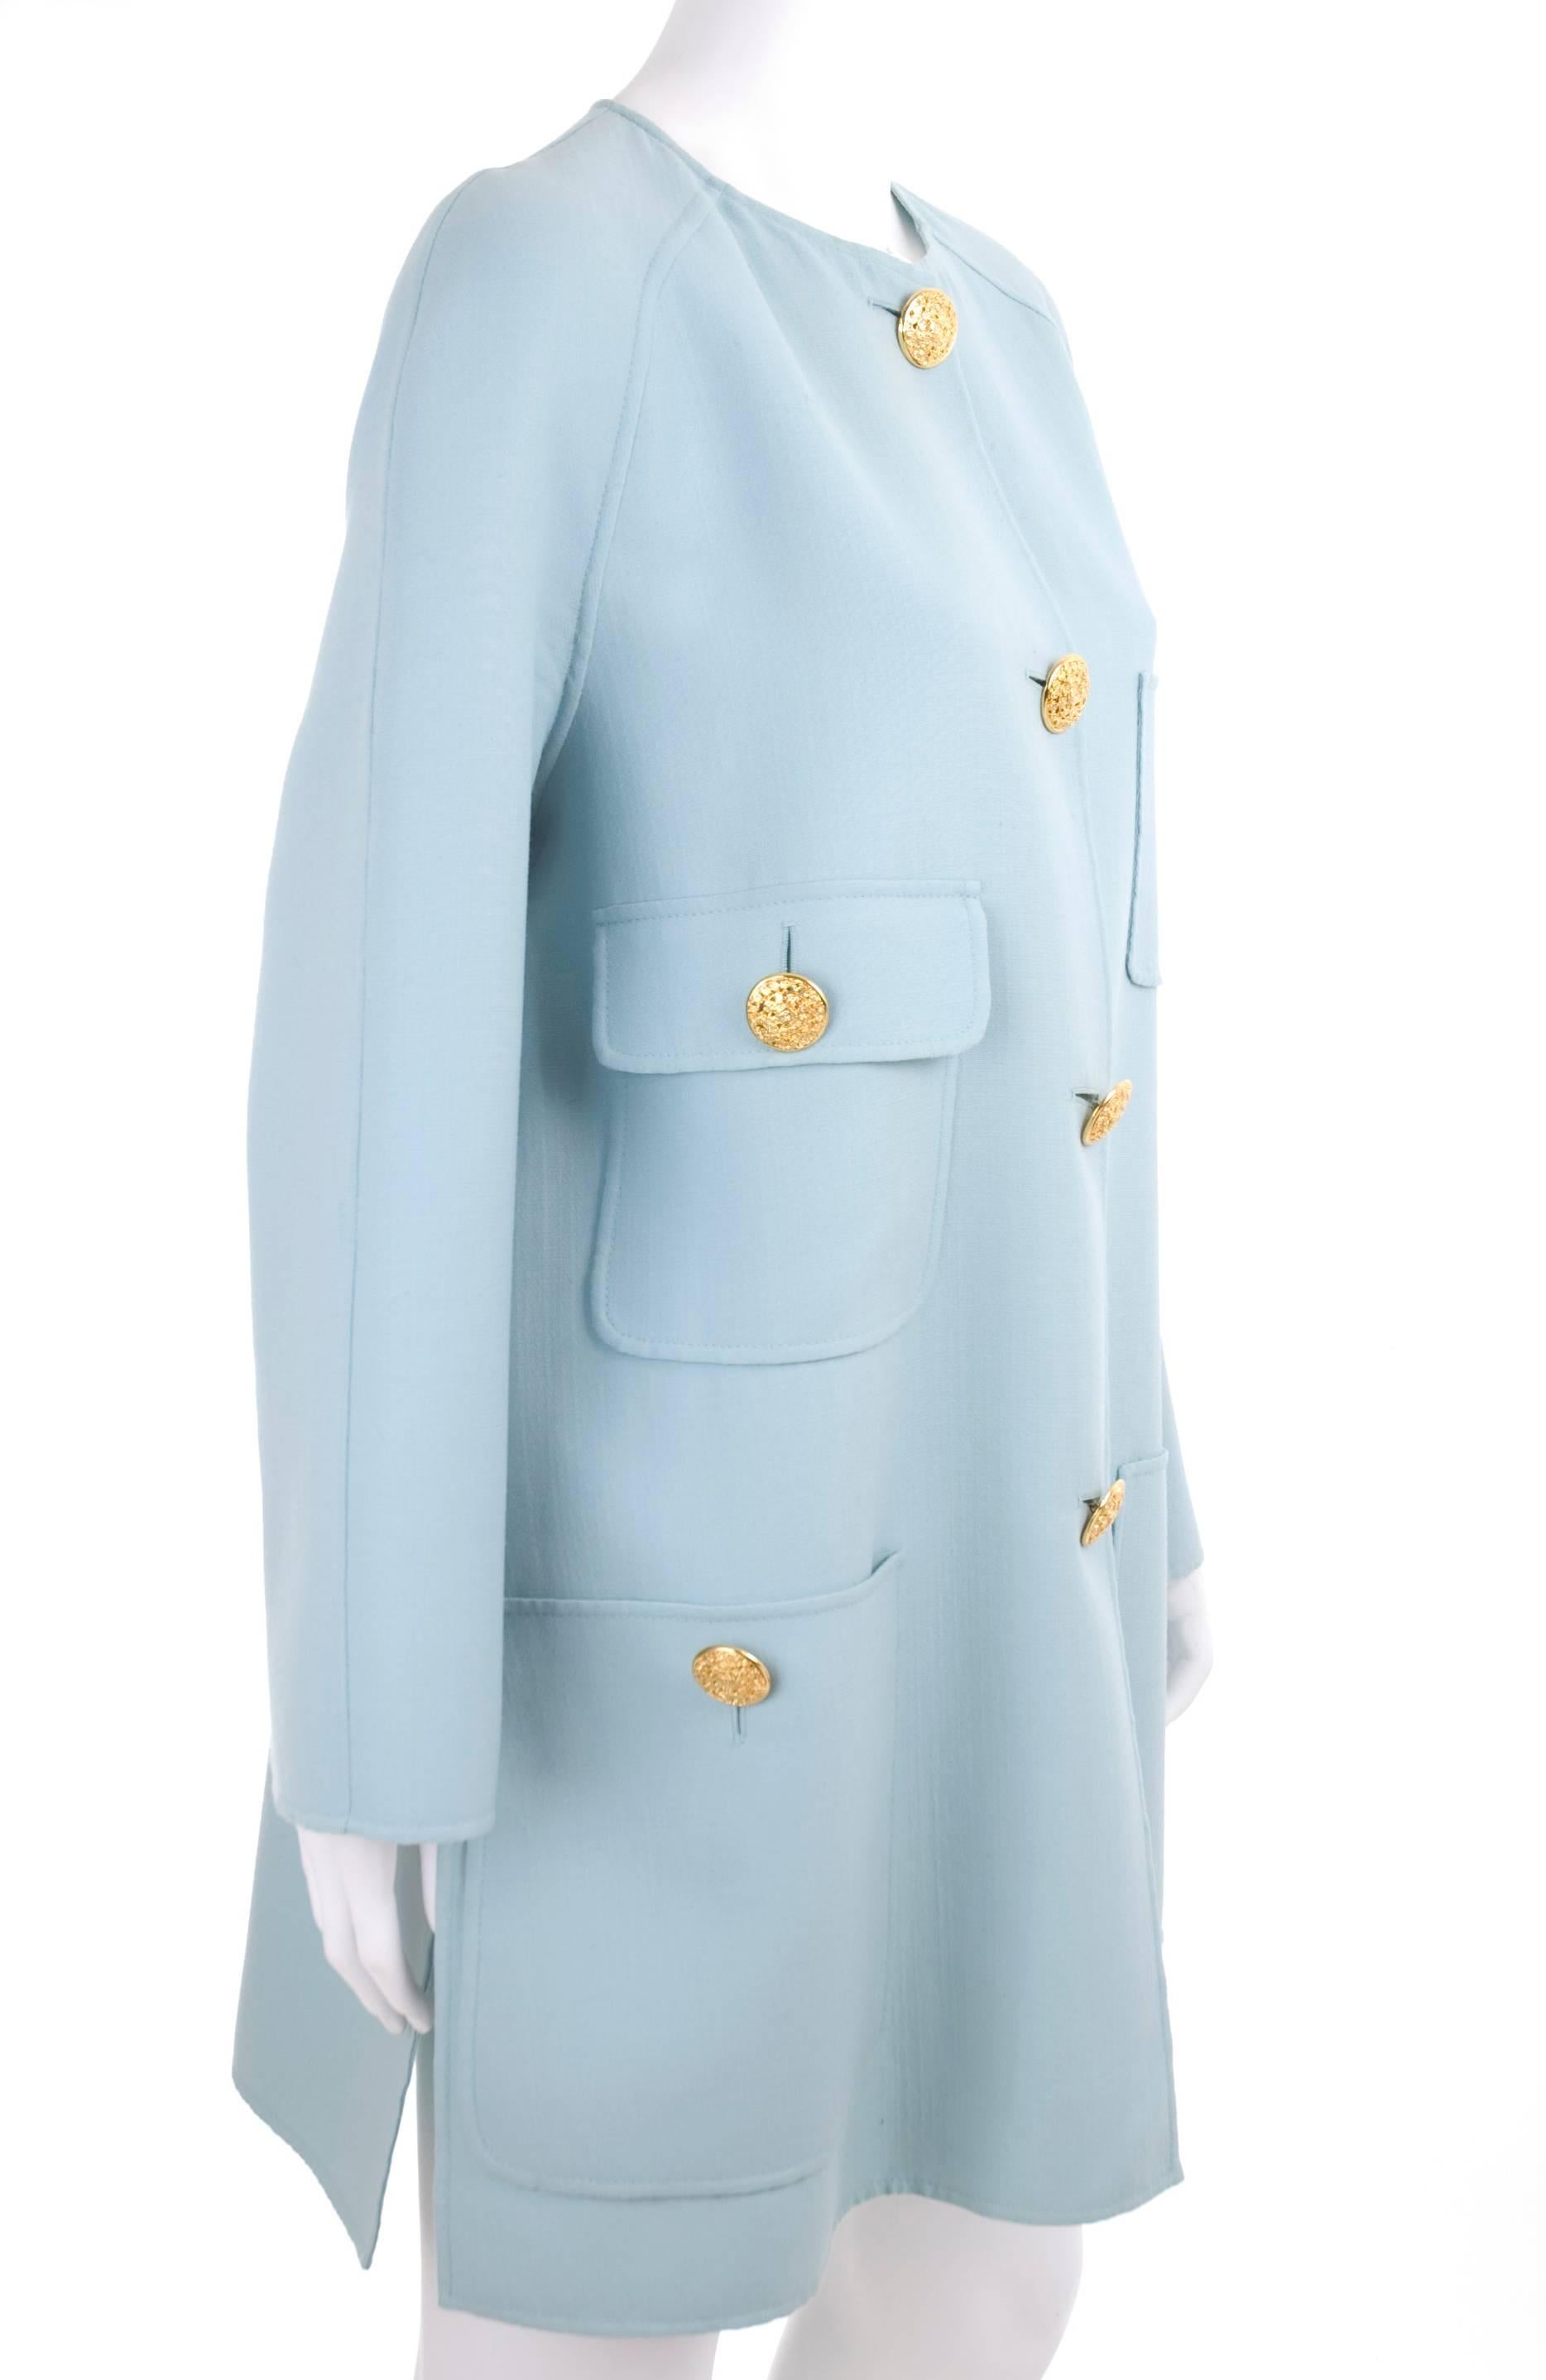 Christian Lacroix Jacket or Overcoat in seafoam blue. 
100% light virgin wool and no lining.
Excellent condition - no flaws to mention.
Size US 12 
Measurements:
Length 33.5